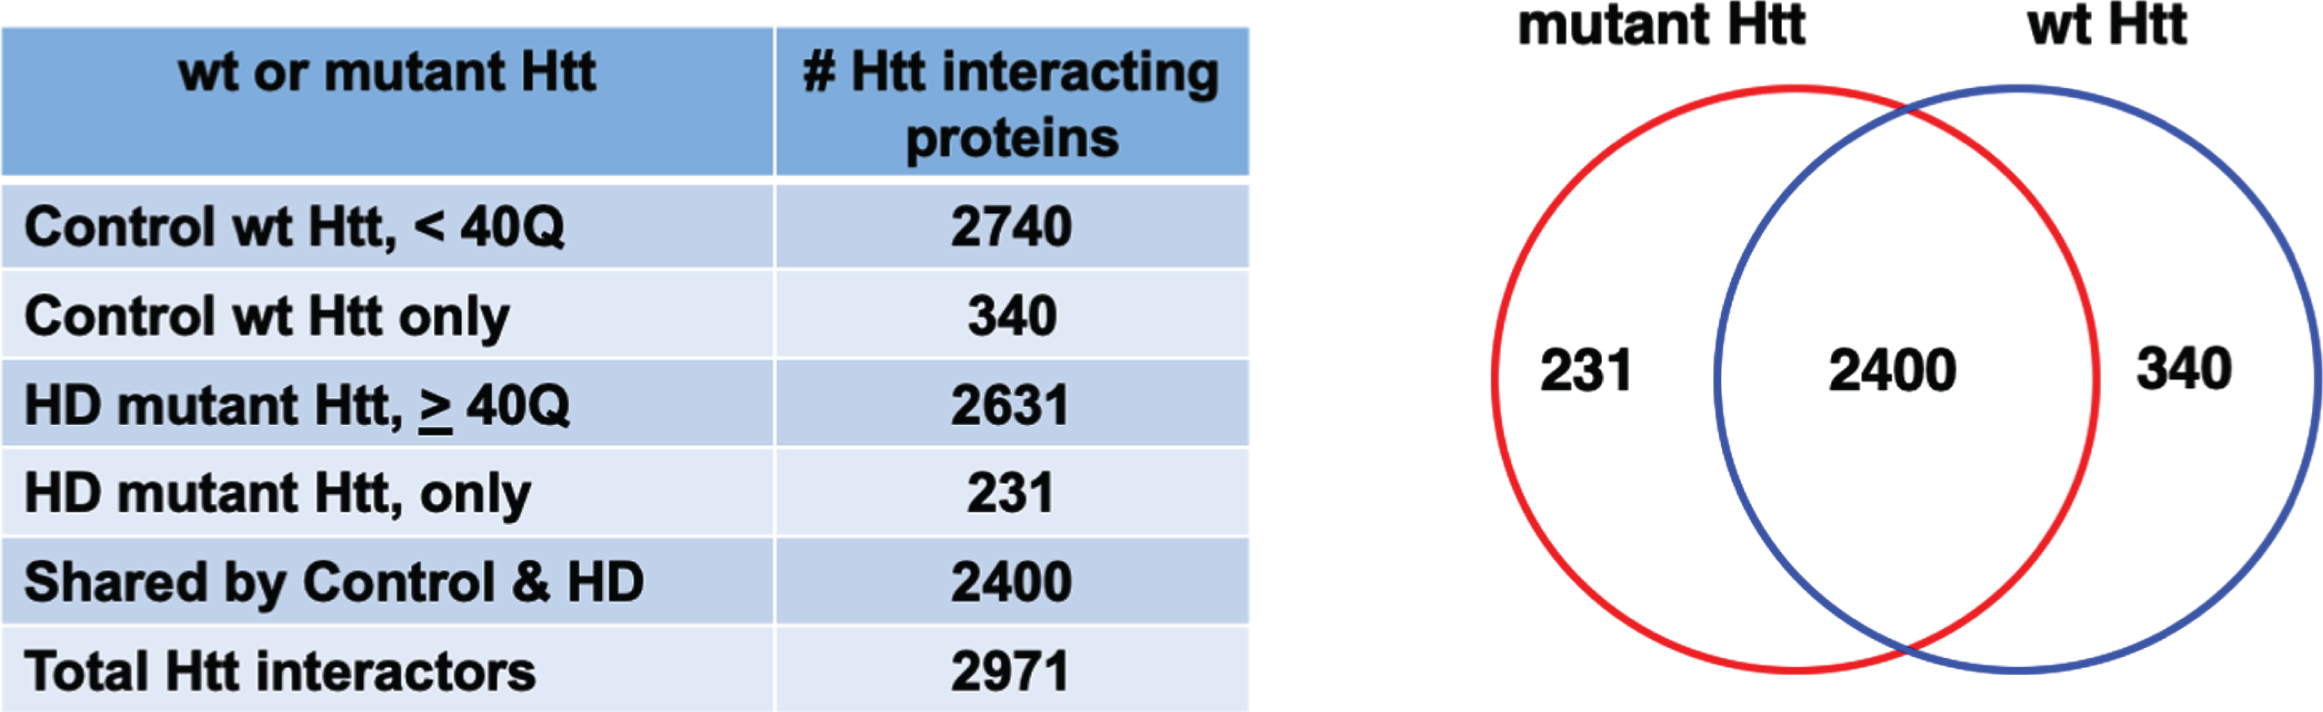 Protein counts for interactors of wt and mutant Htt. The numbers of distinct proteins found to interact with control wt Htt and HD mutant Htt are shown by a Venn diagram. Proteins were found that only interacted with mutant Htt or only with control wt Htt. Many proteins interacted with both wt and mutant Htt.